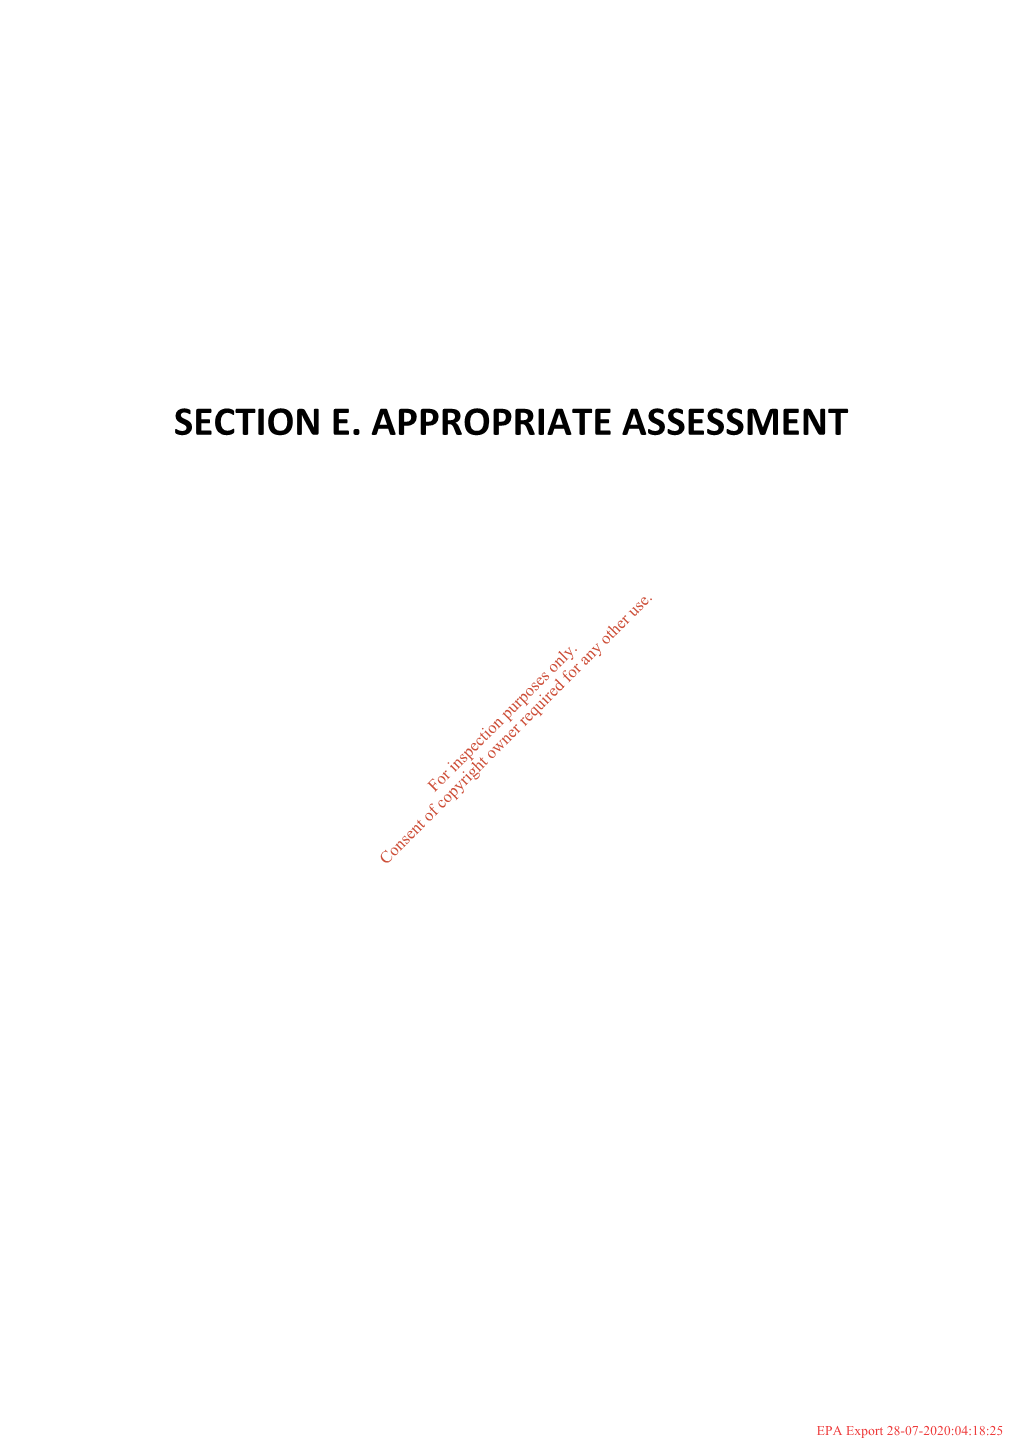 Section E. Appropriate Assessment